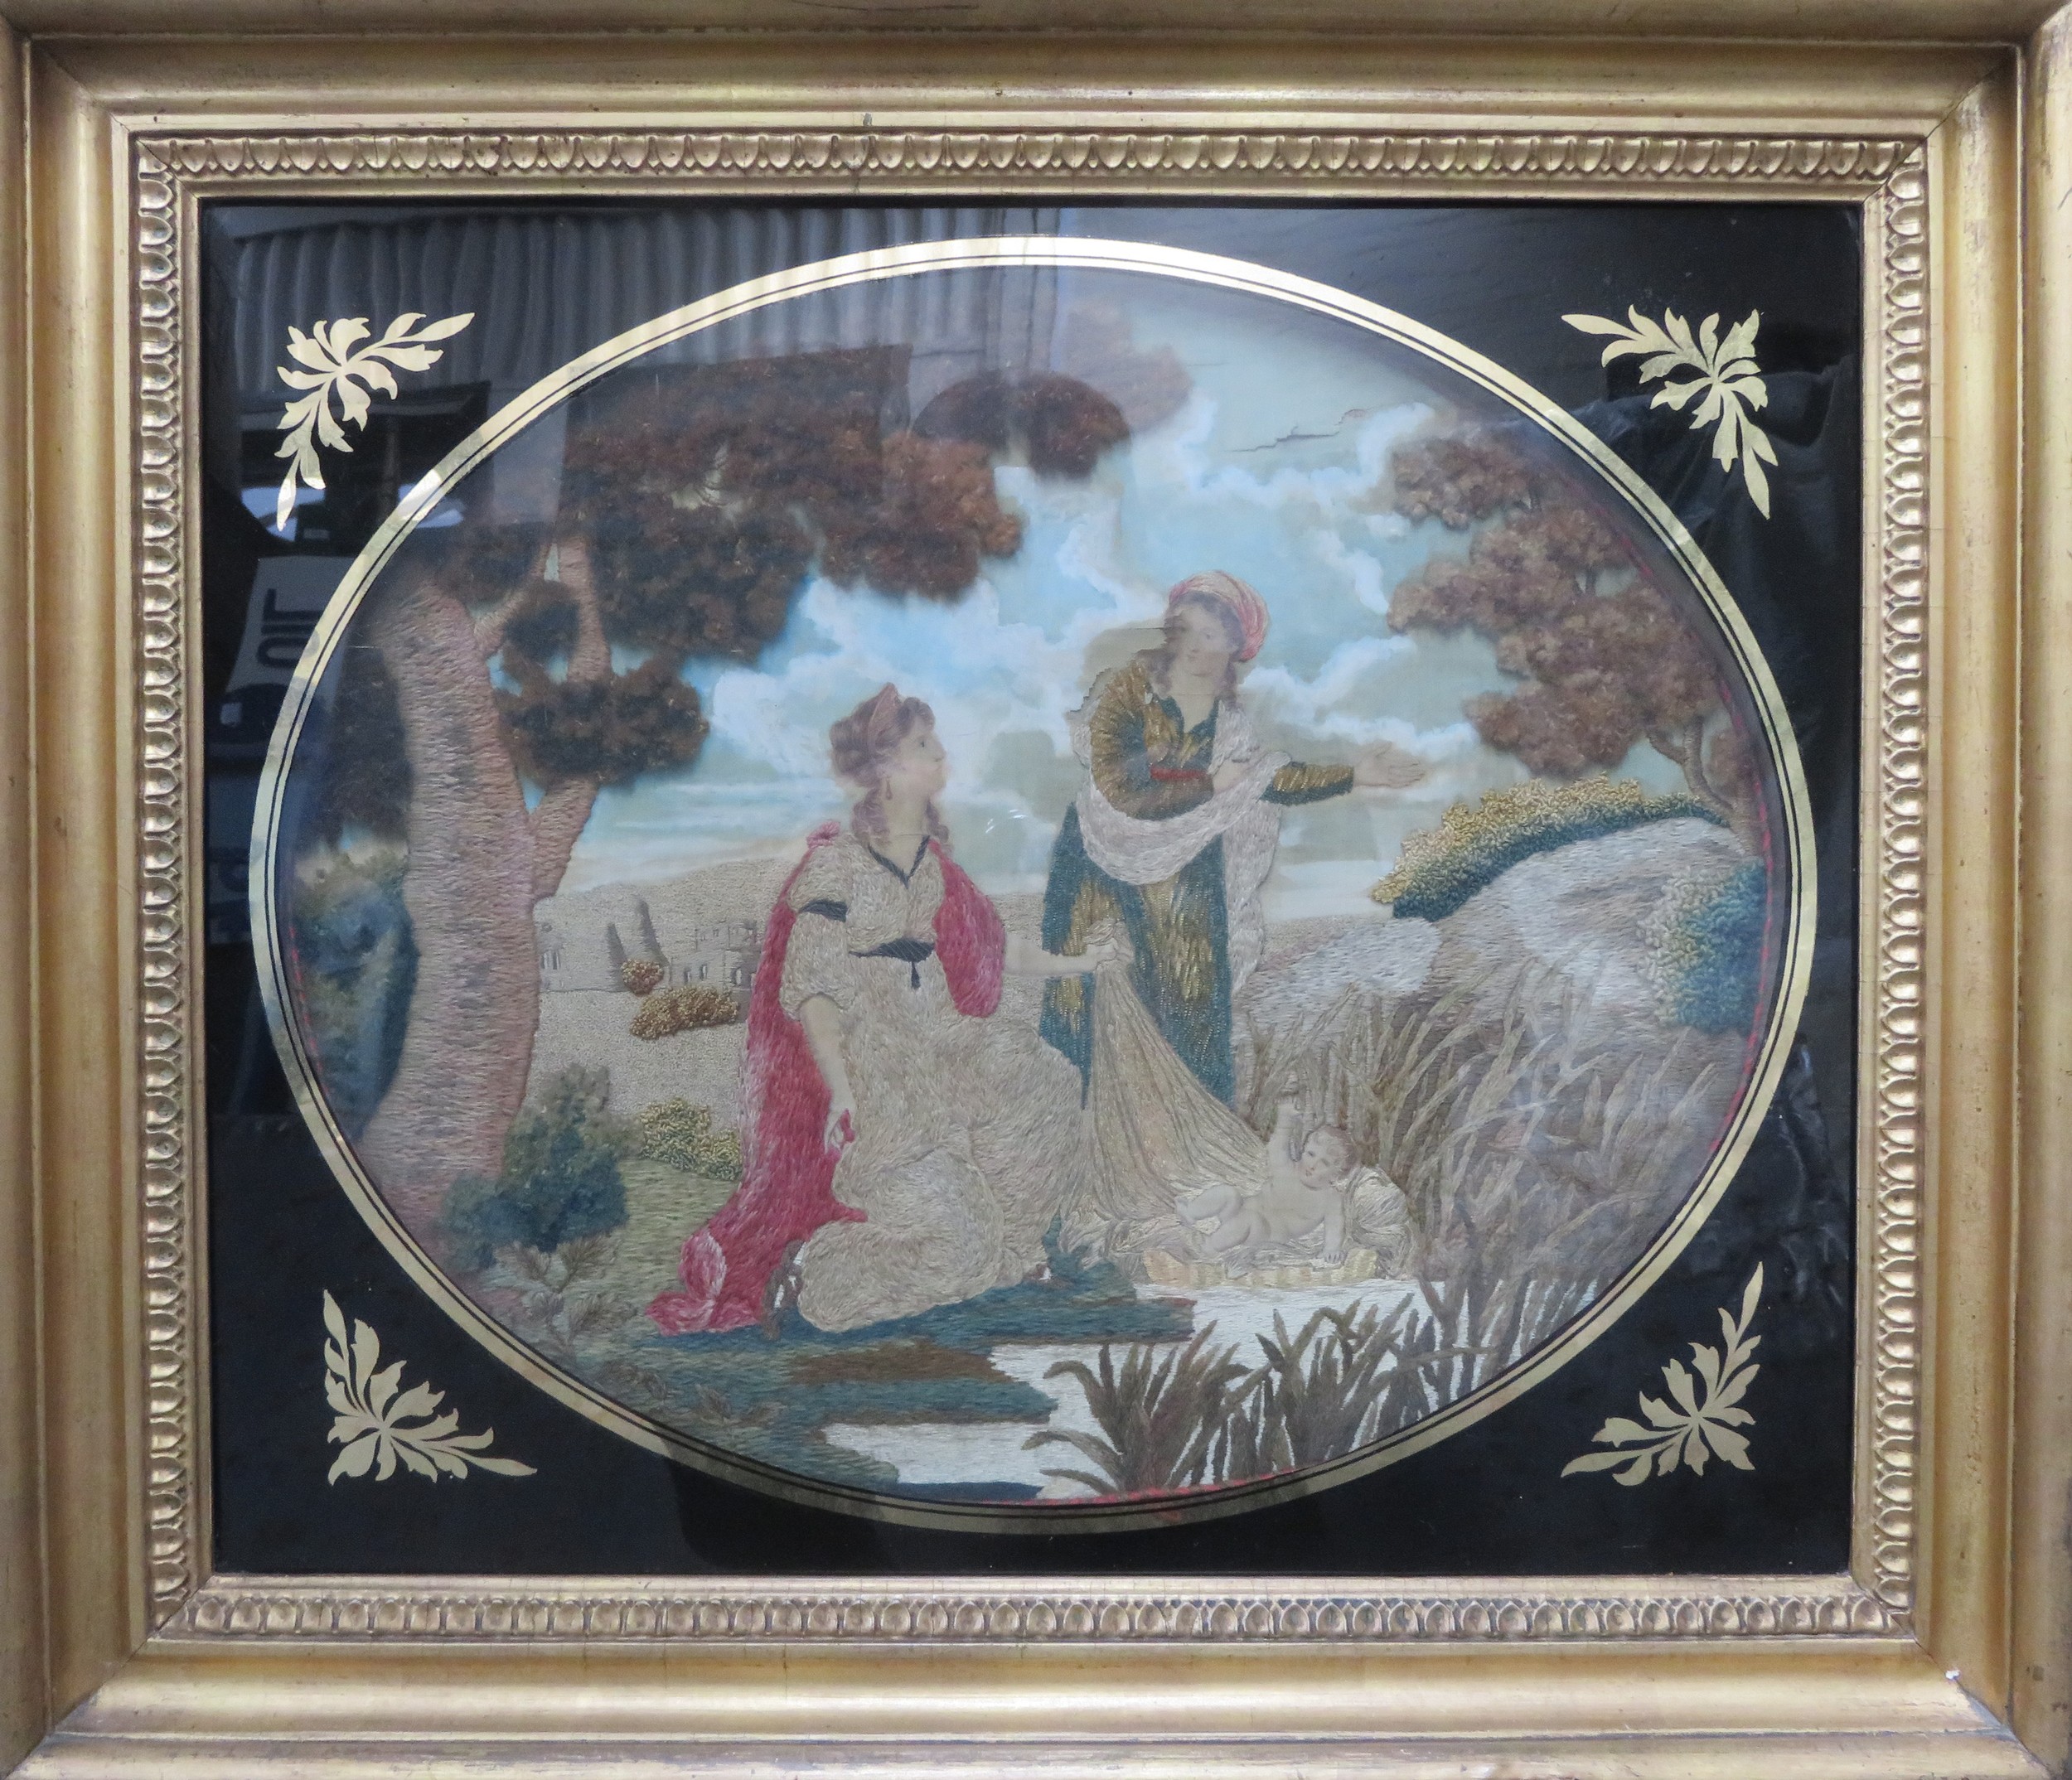 Gilt framed and glazed 19th century embroidered silk oval panel depicting Moses in the bulrushes.